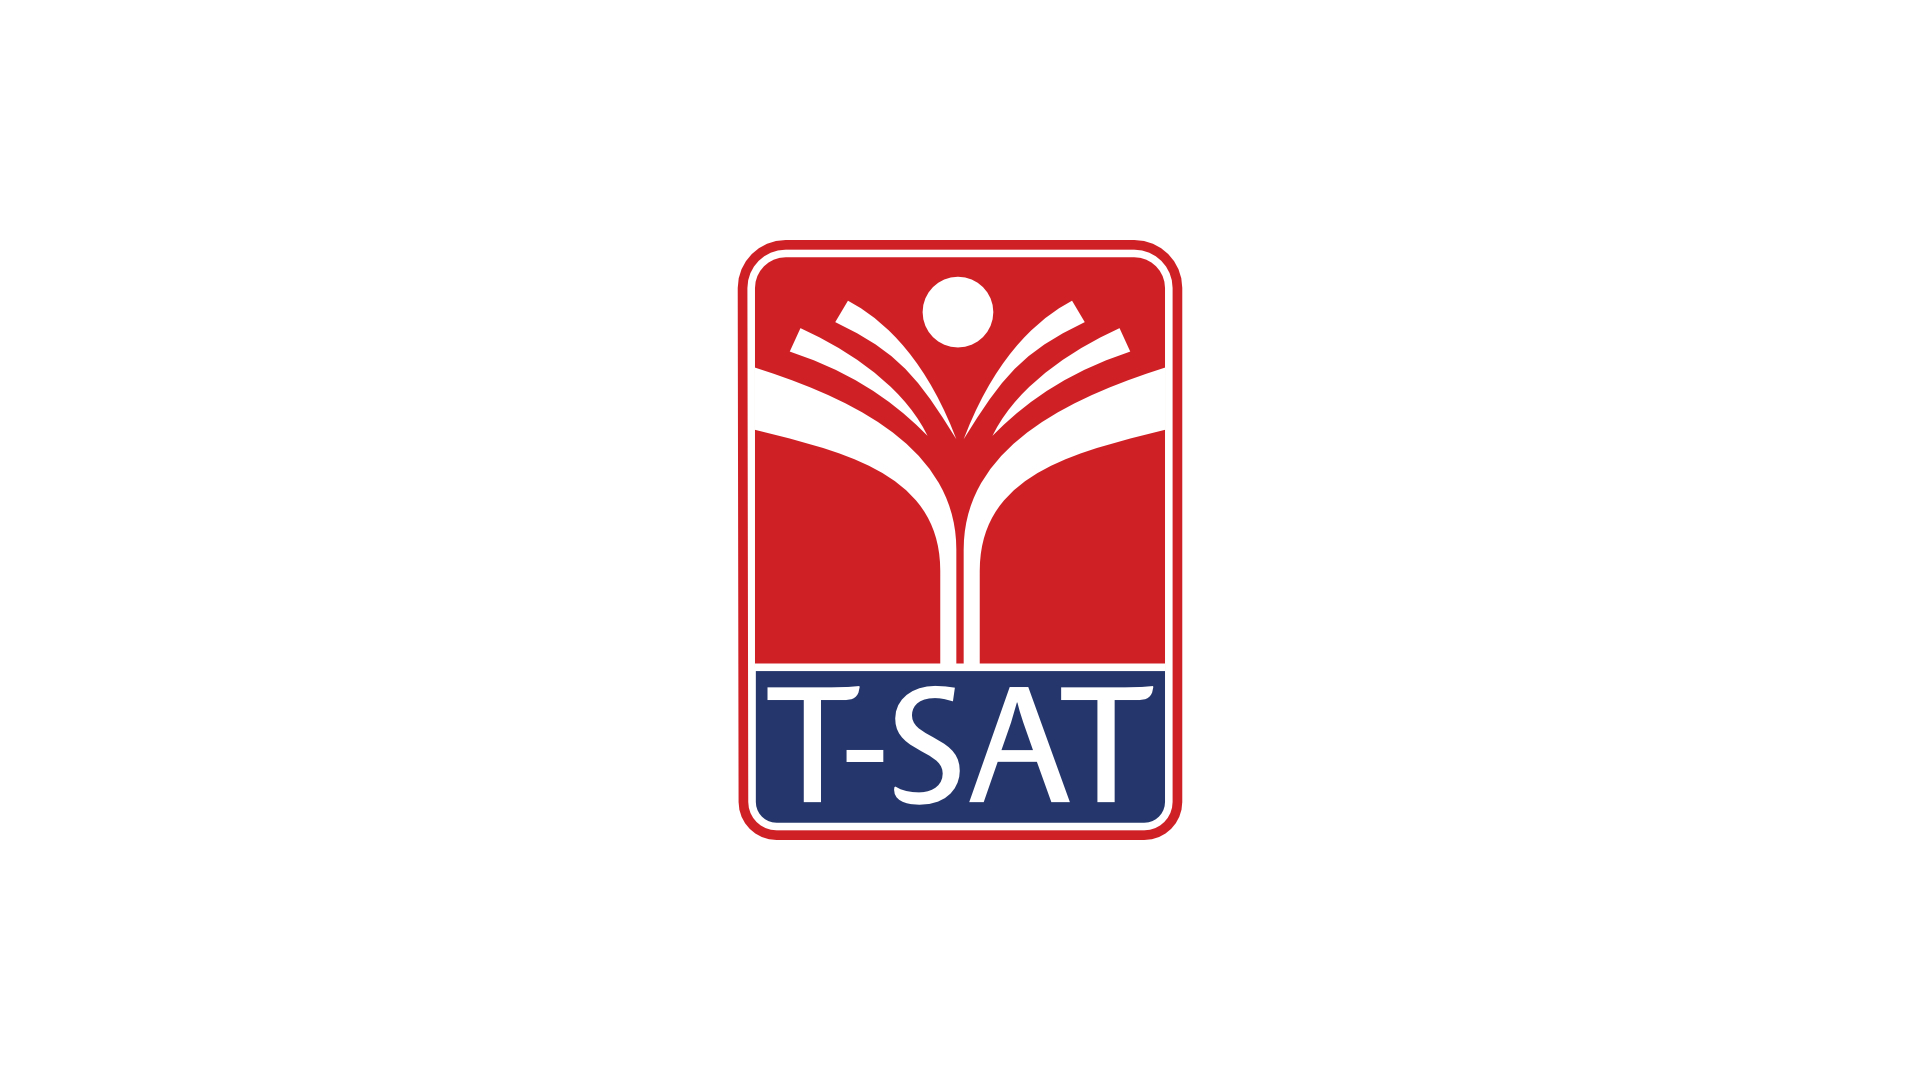 The identity was designed for T-SAT Network Channel owned by Society for Telangana State Network (SoFTNET) which is an initiative of Department of Information Technology, Electronics and Communications, Government of Telangana State; to provide education using satellite communications and Information Technology. T-SAT (Telangana Skill, Academics and Training) Network logo is an abstraction of open book representing the open learning environment.